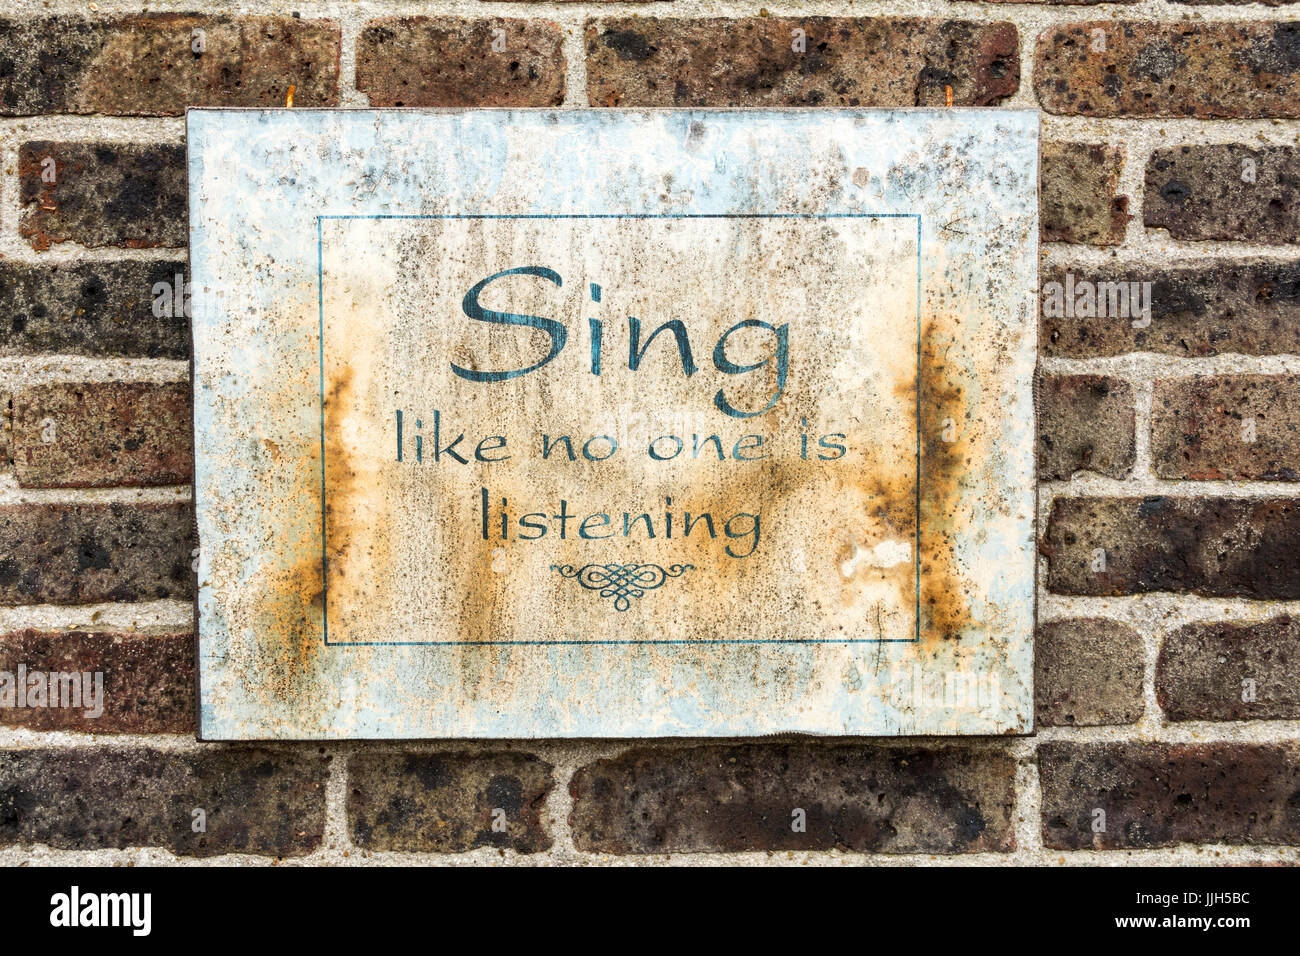 Sing like no one is listening plaque on a brick wall in Tilbury, Essex, England, UK Stock Photo